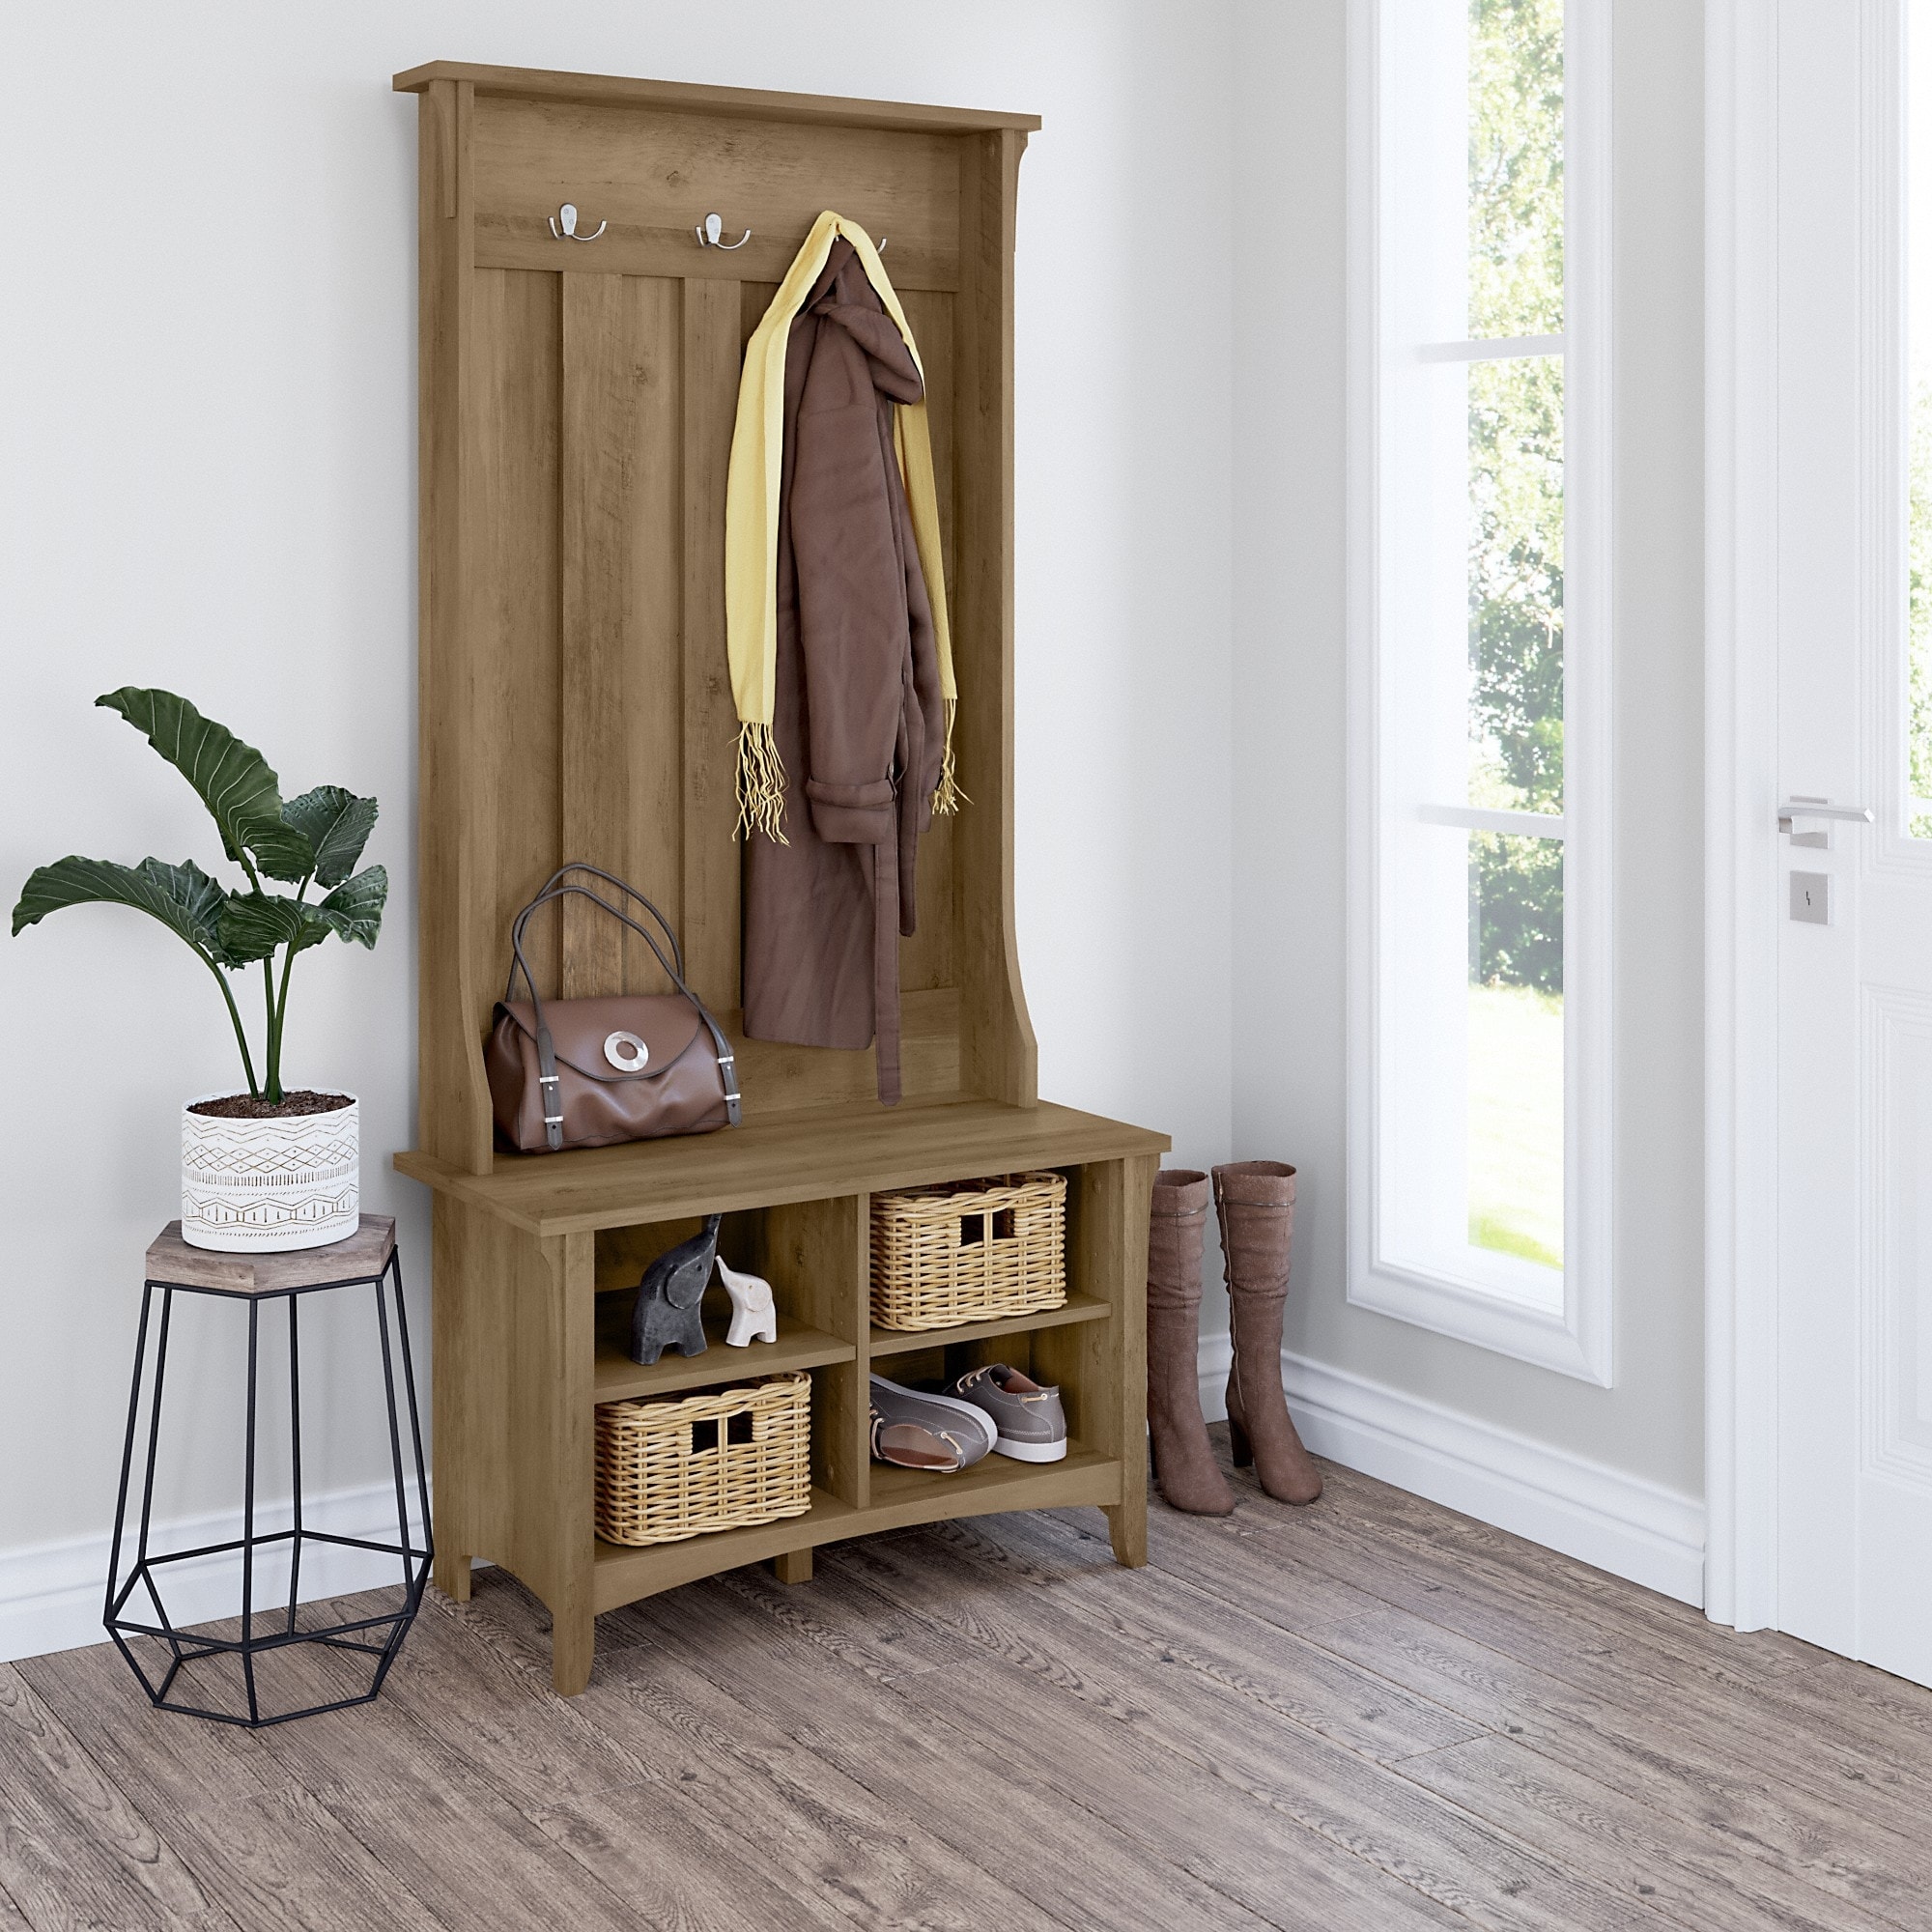 https://ak1.ostkcdn.com/images/products/is/images/direct/5e378d9561b9073562fe11f95ef9f8452a512134/Salinas-Hall-Tree-with-Shoe-Storage-Bench-by-Bush-Furniture.jpg